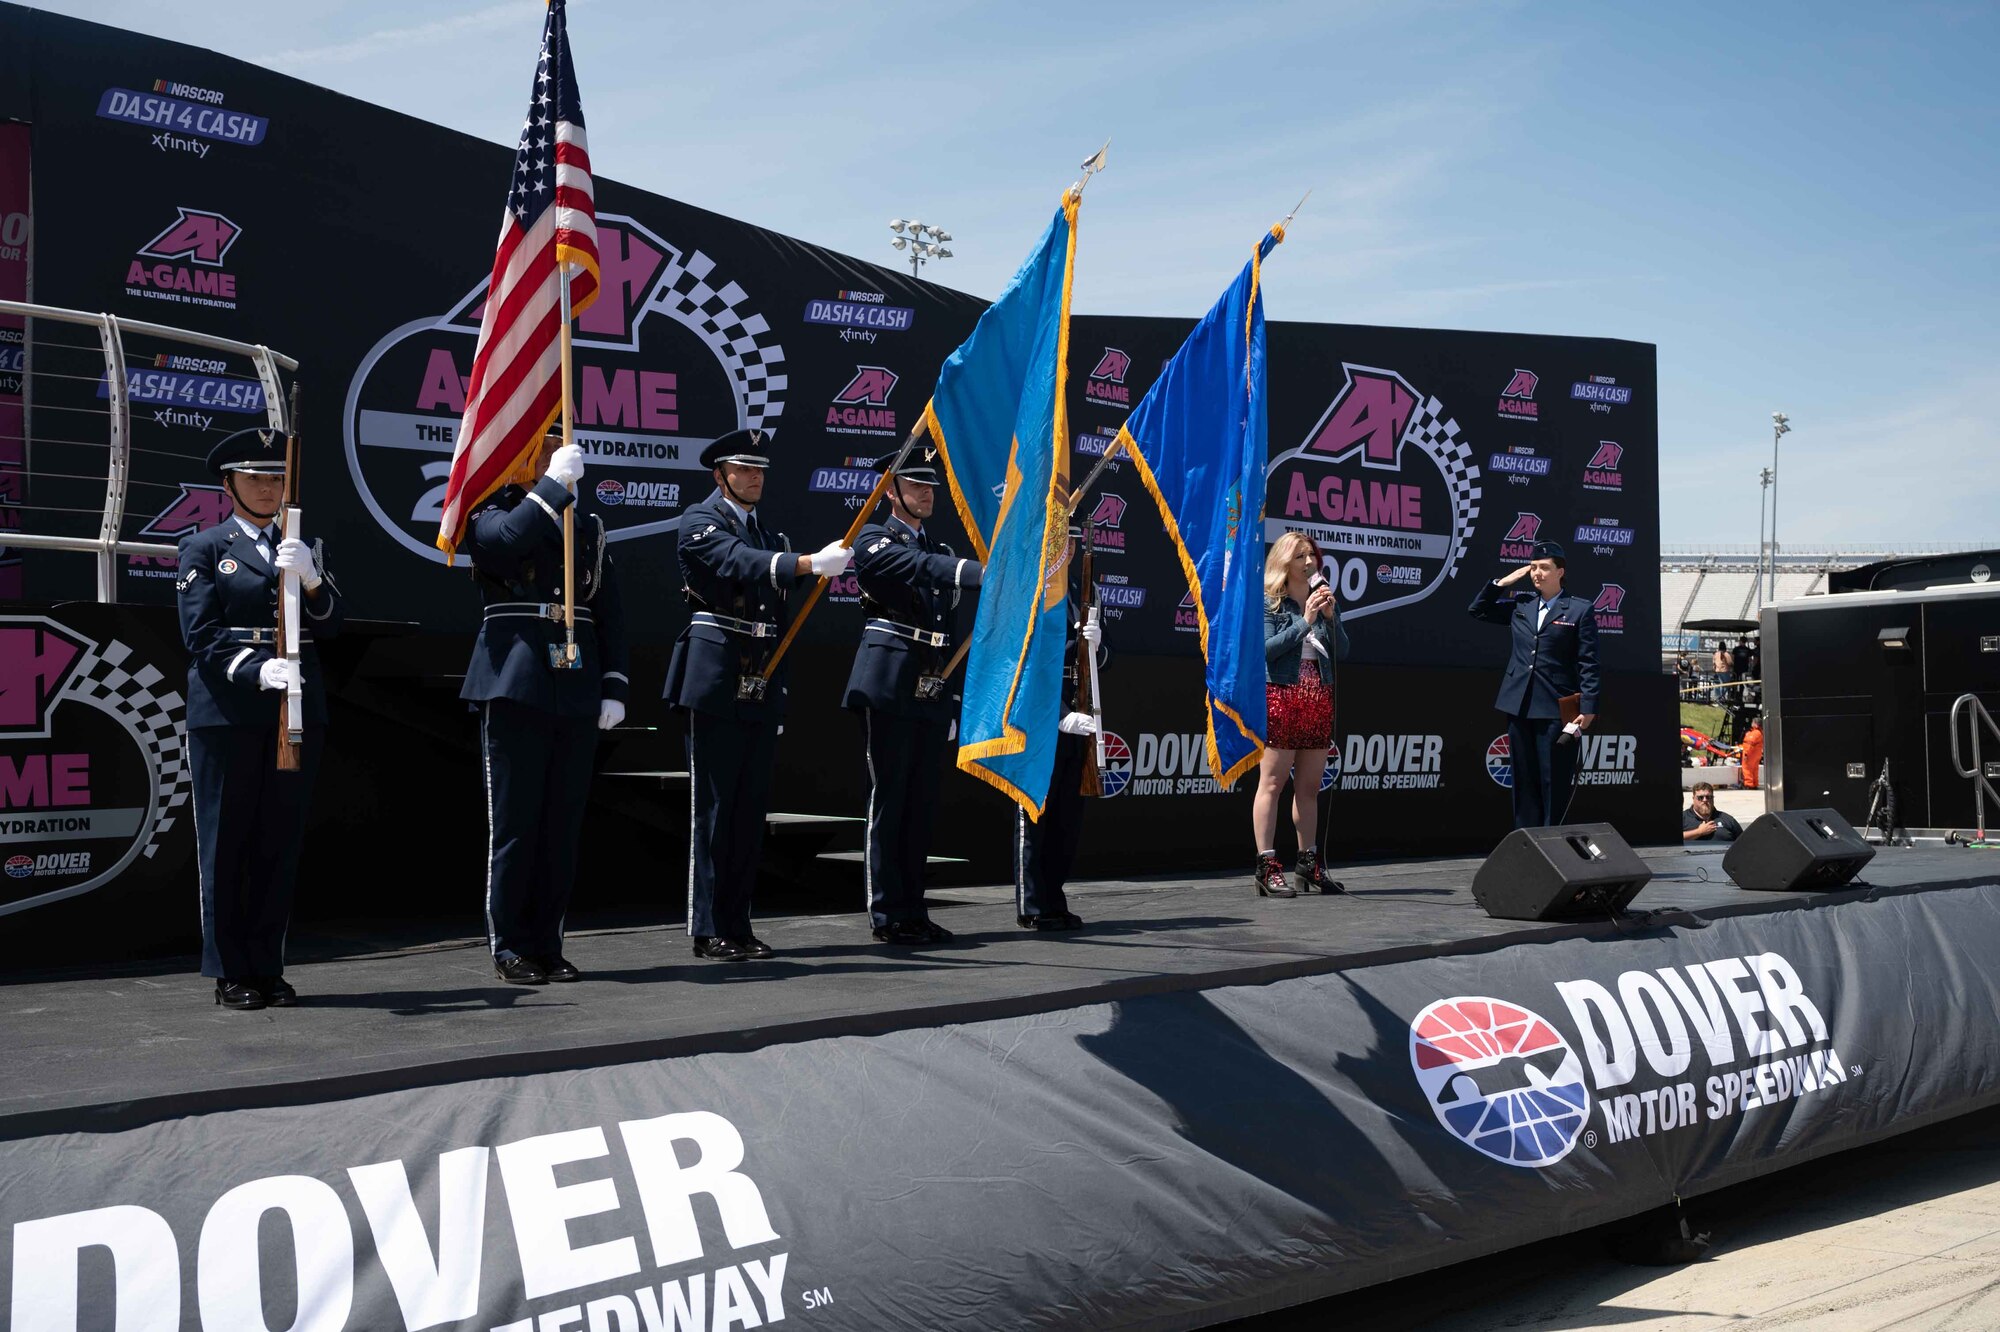 Dover Air Force Base Honor Guard members exit the stage after presenting the colors at the A-Game 200 NASCAR race at Dover Motor Speedway in Dover, Delaware, April 30, 2022. The Honor Guard presented the colors during pre-race events throughout the 2022 NASCAR weekend. (U.S. Air Force photo by Senior Airman Faith Schaefer)